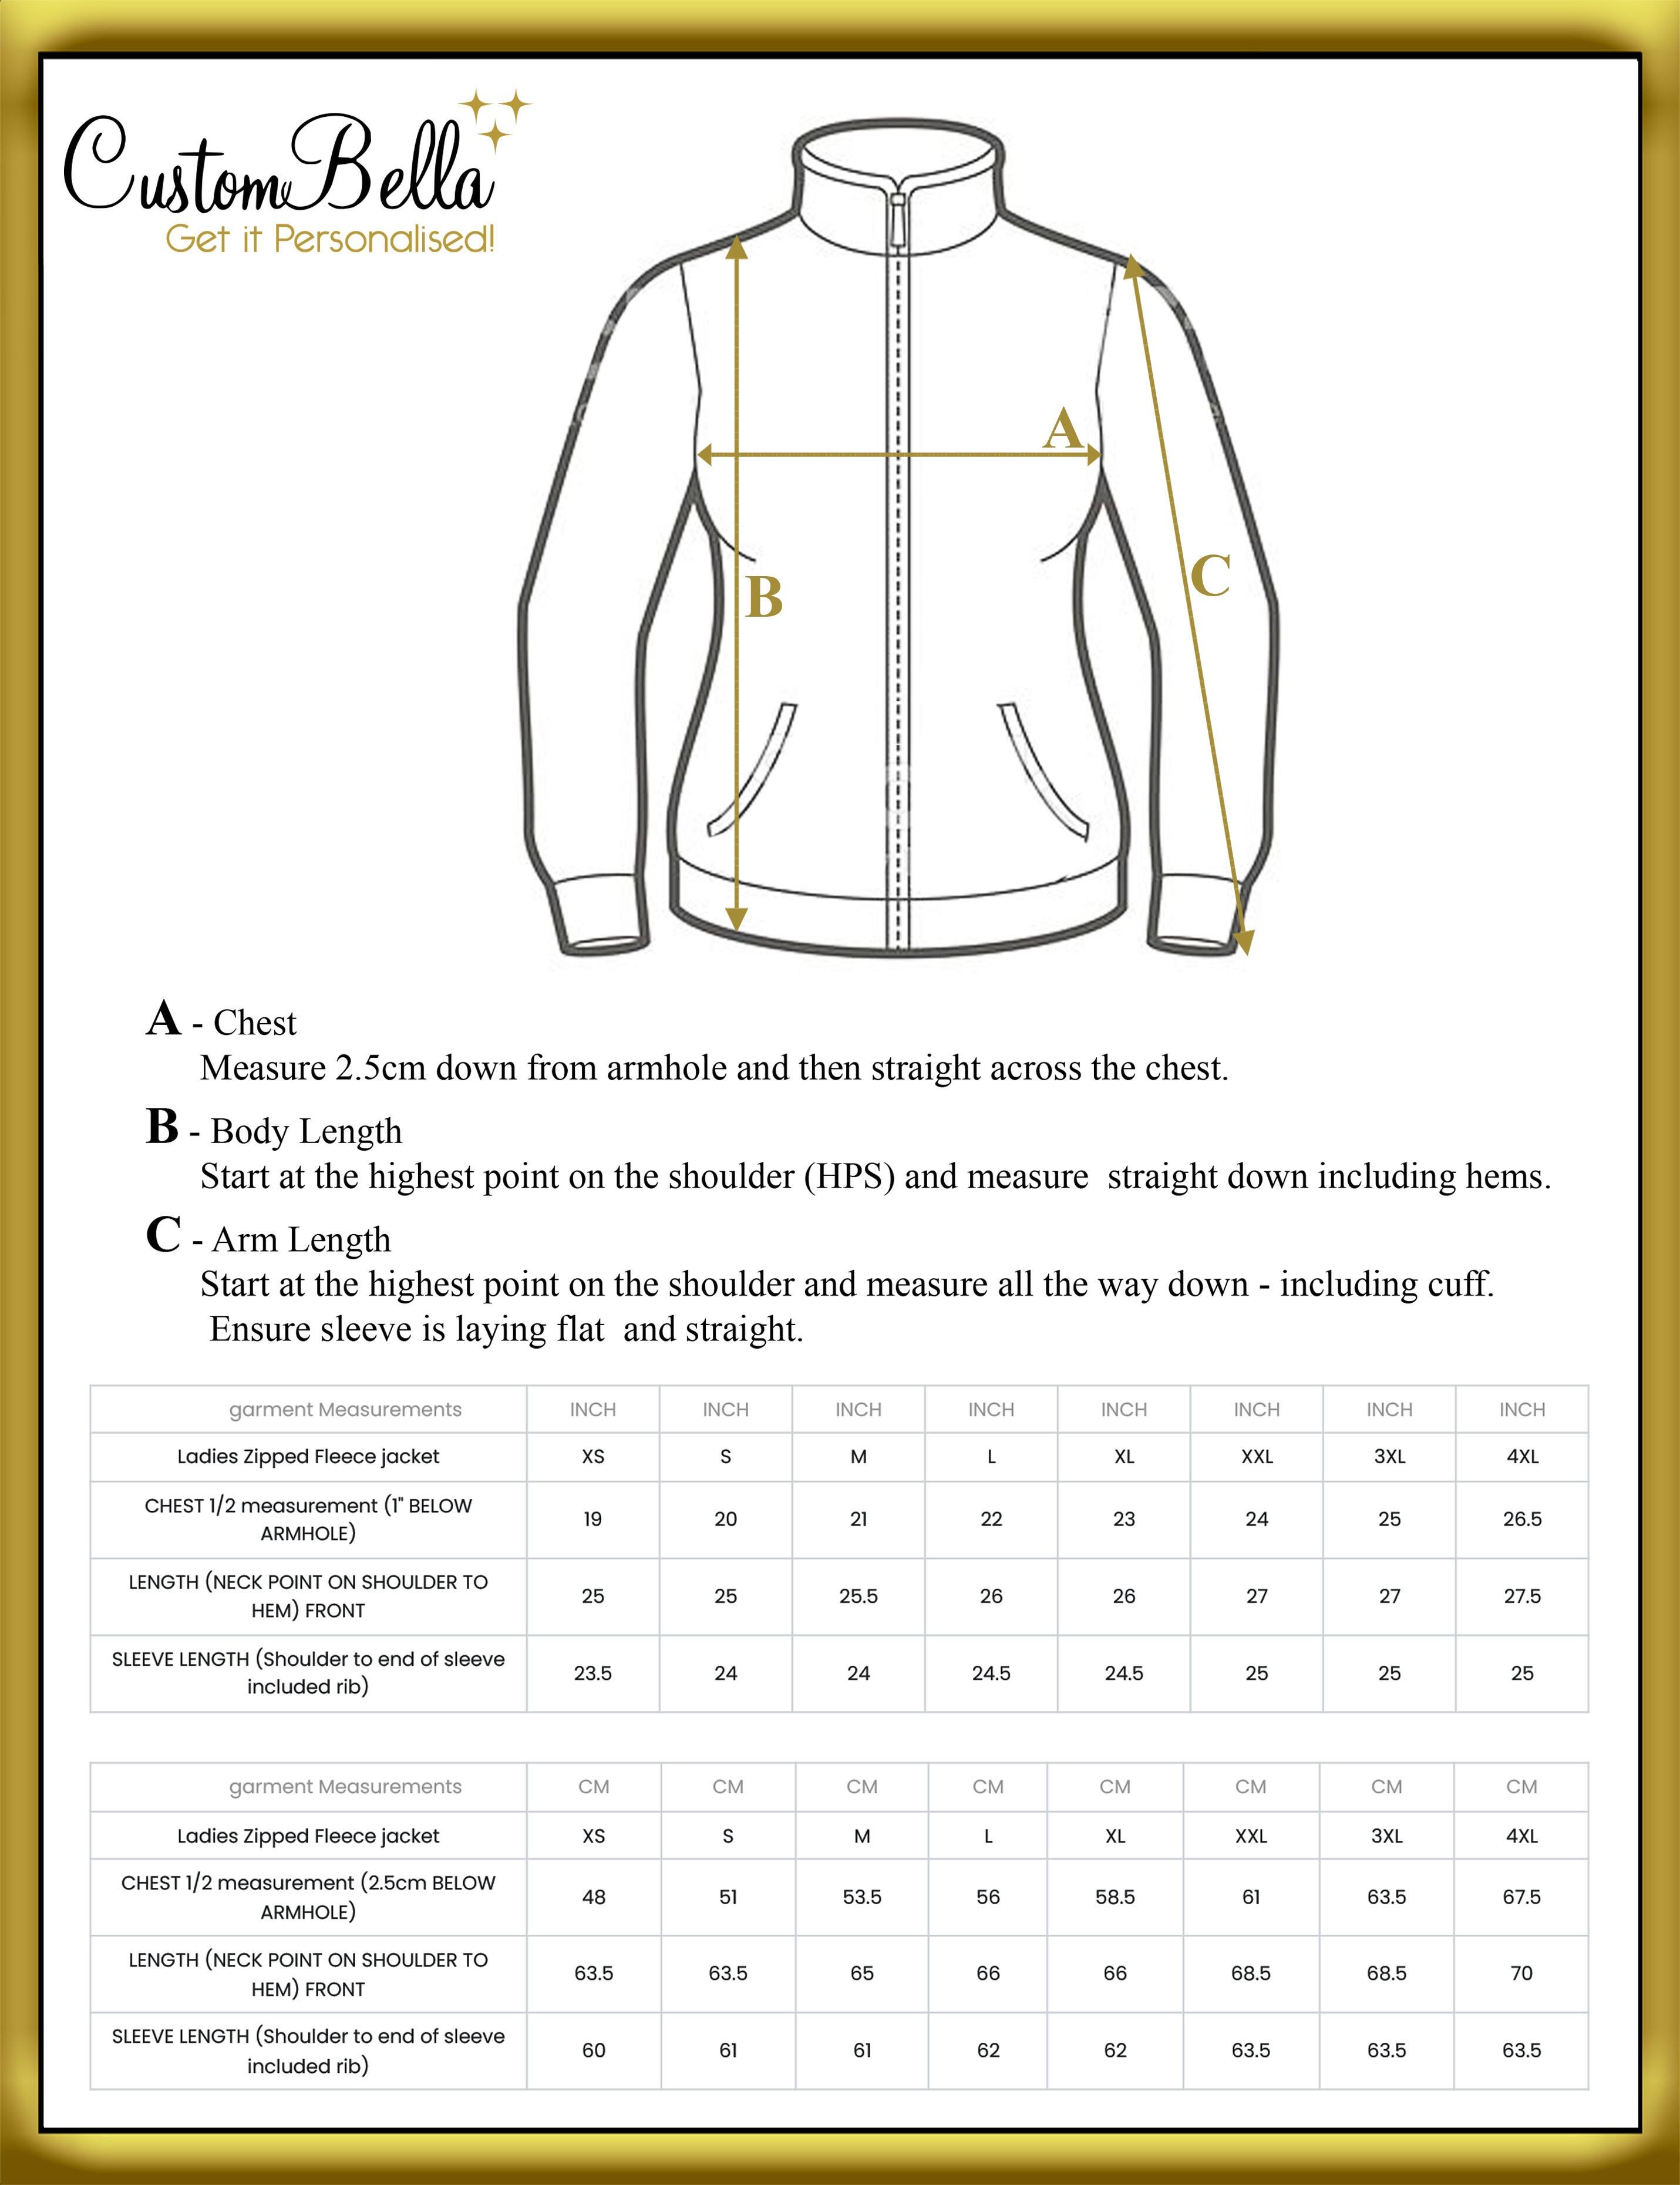 Personalised embroidered ladies or women's fleece jacket size chart